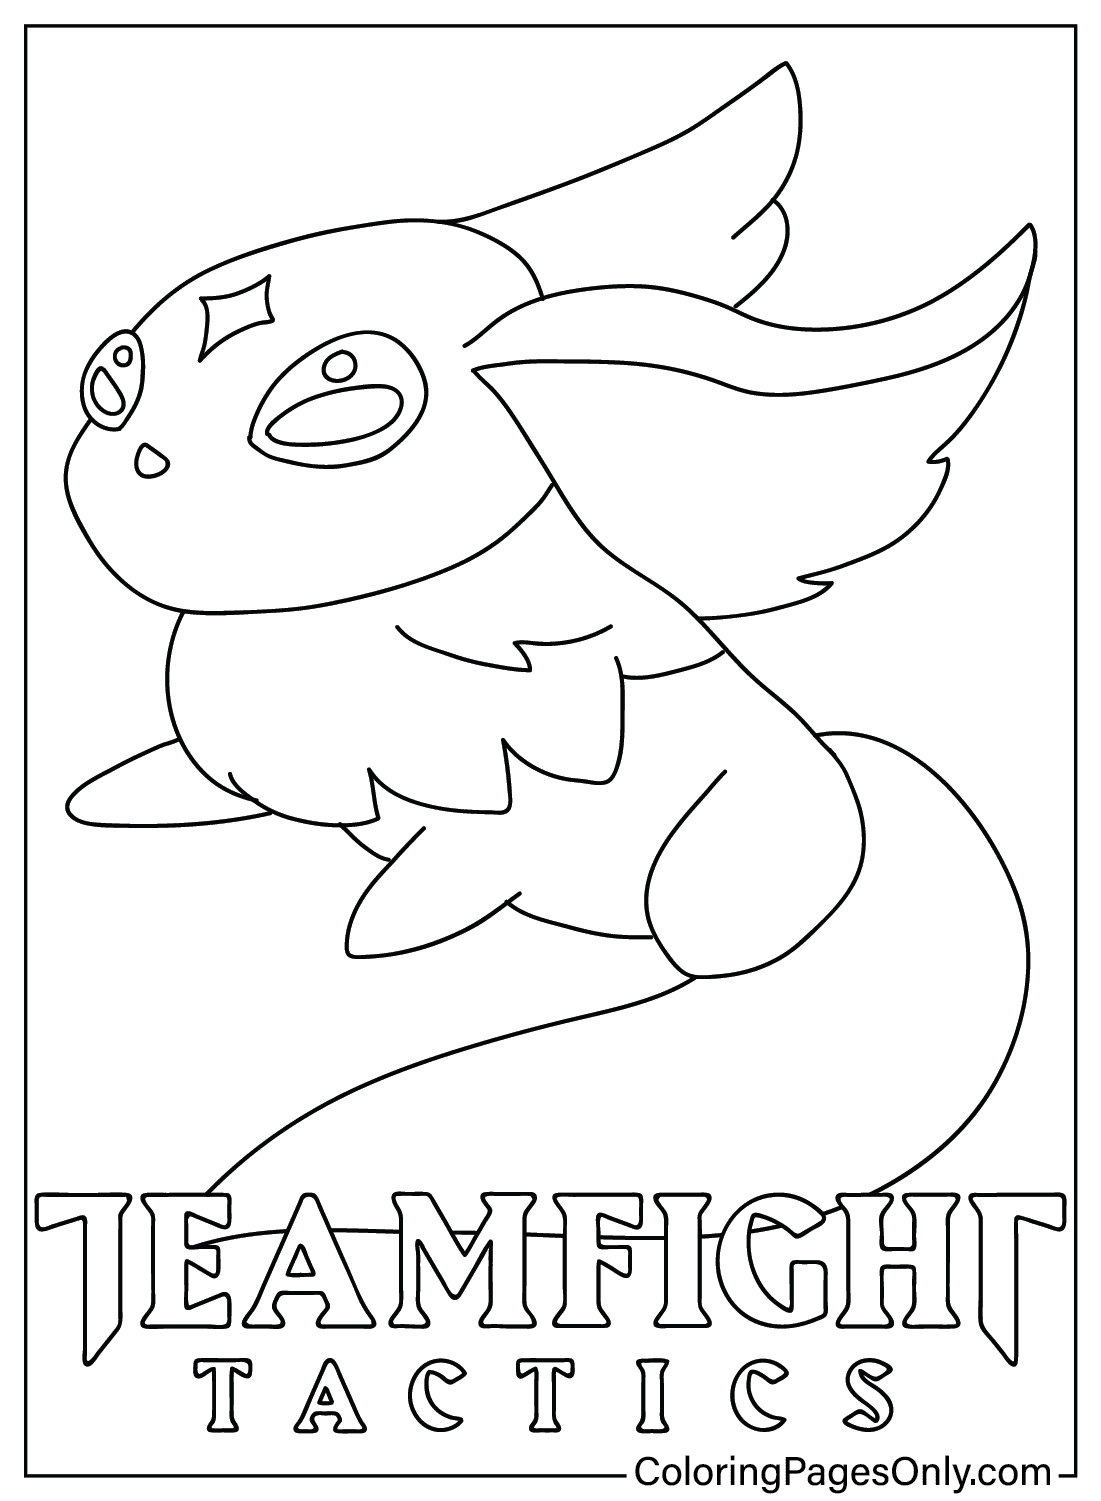 Teamfight Tactics Coloring Page from Teamfight Tactics